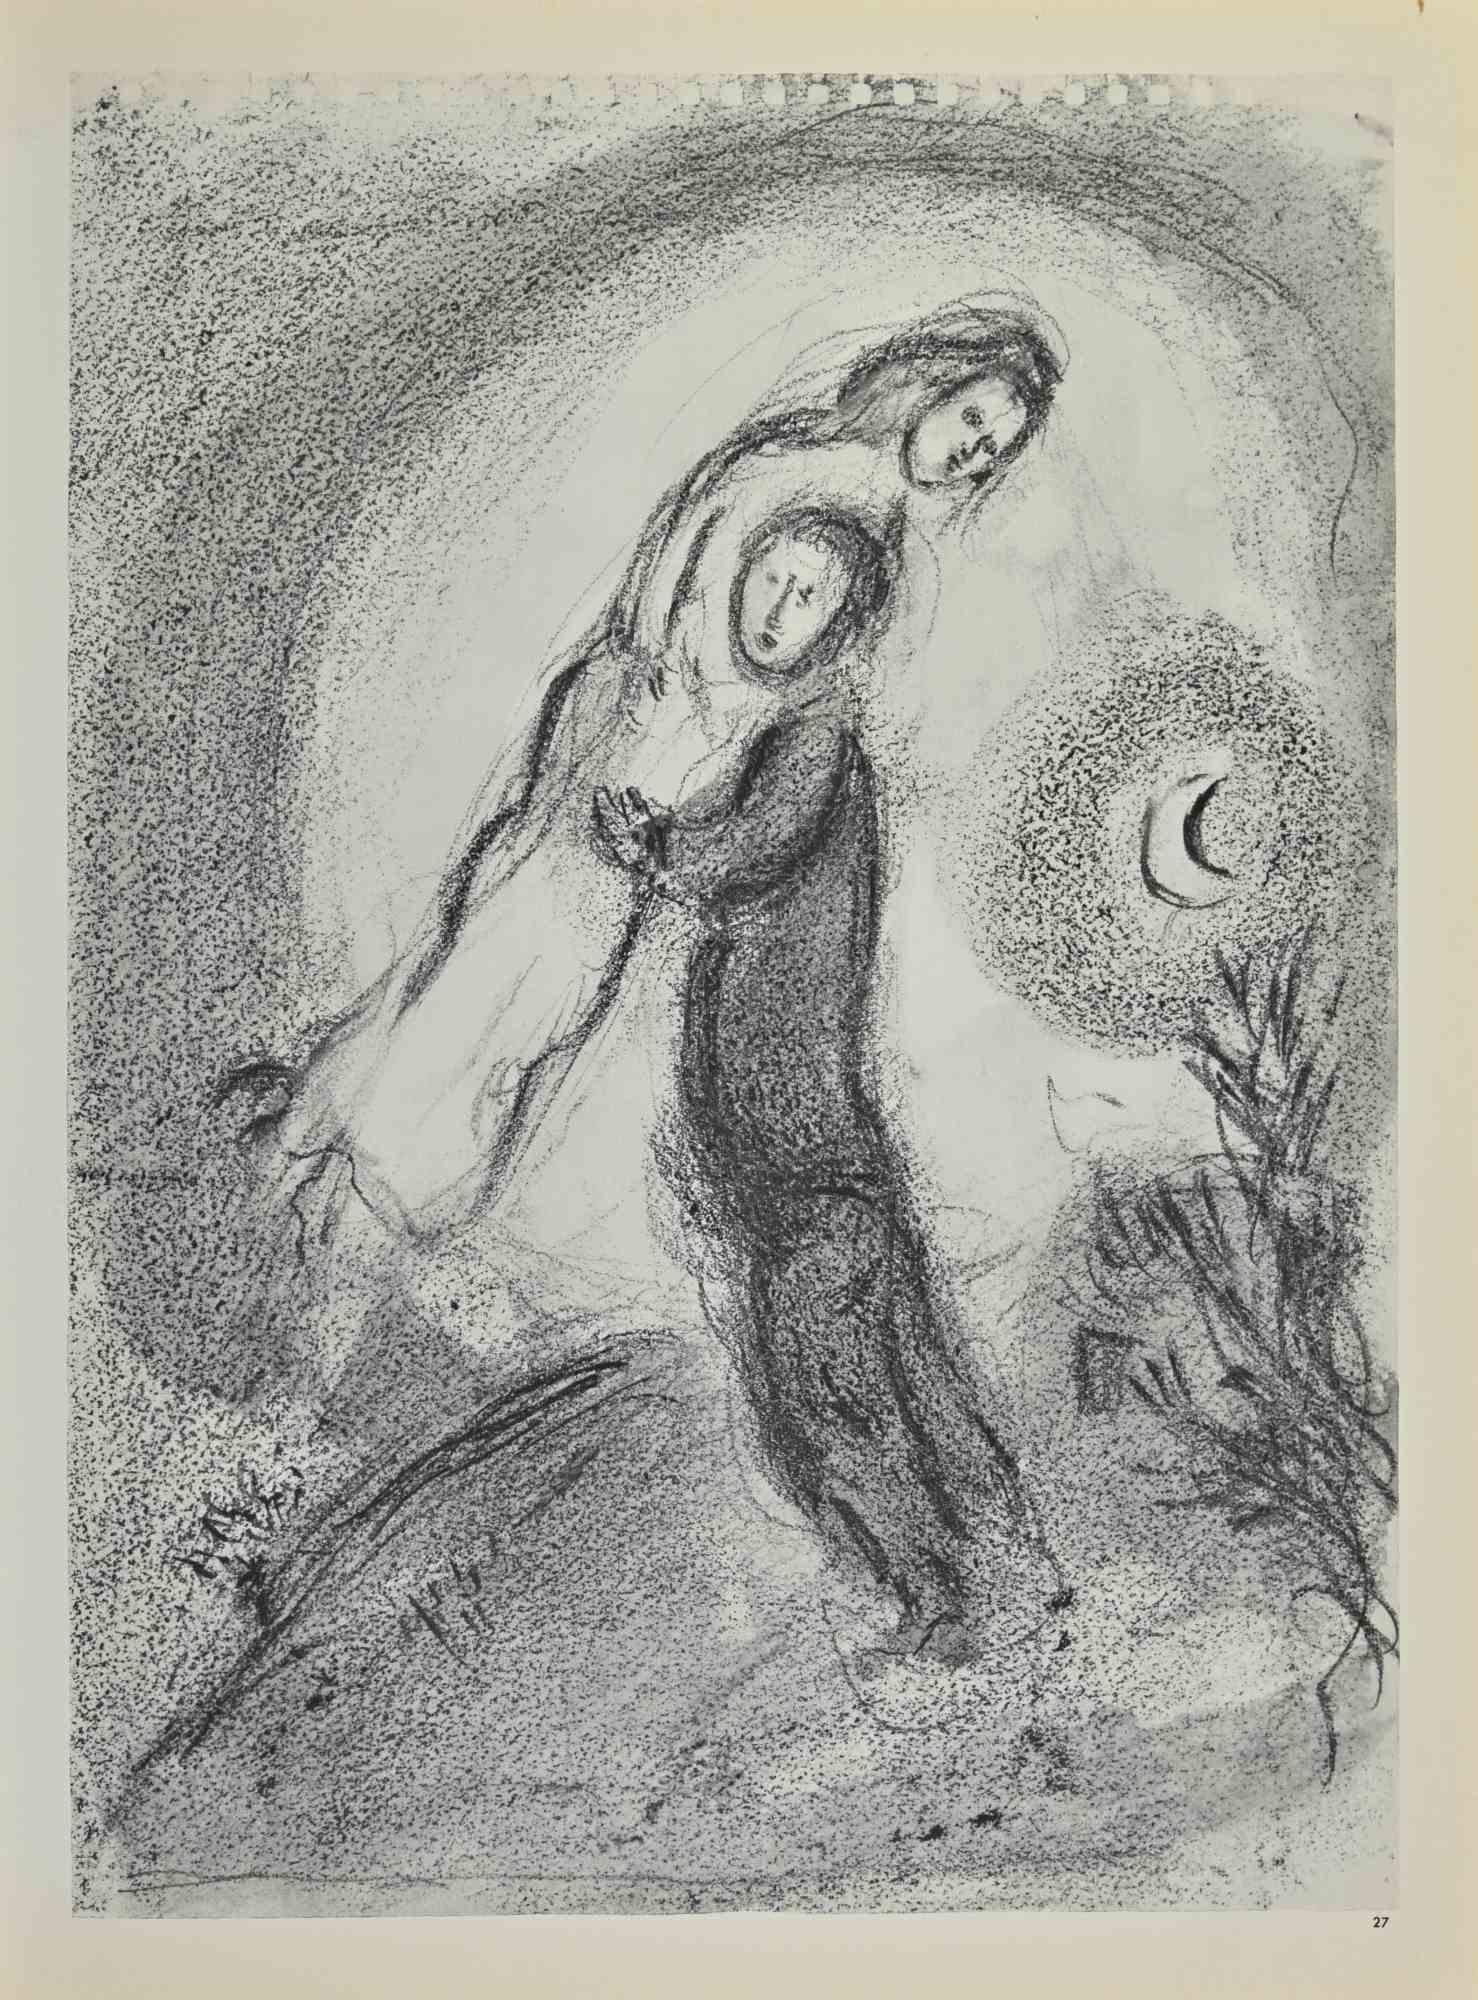 Sichem Removed Dina  is an artwork realized by March Chagall, 1960s.

Lithograph on brown-toned paper, no signature.

Lithograph on both sheets.

Edition of 6500 unsigned lithographs. Printed by Mourlot and published by Tériade, Paris.

Ref.